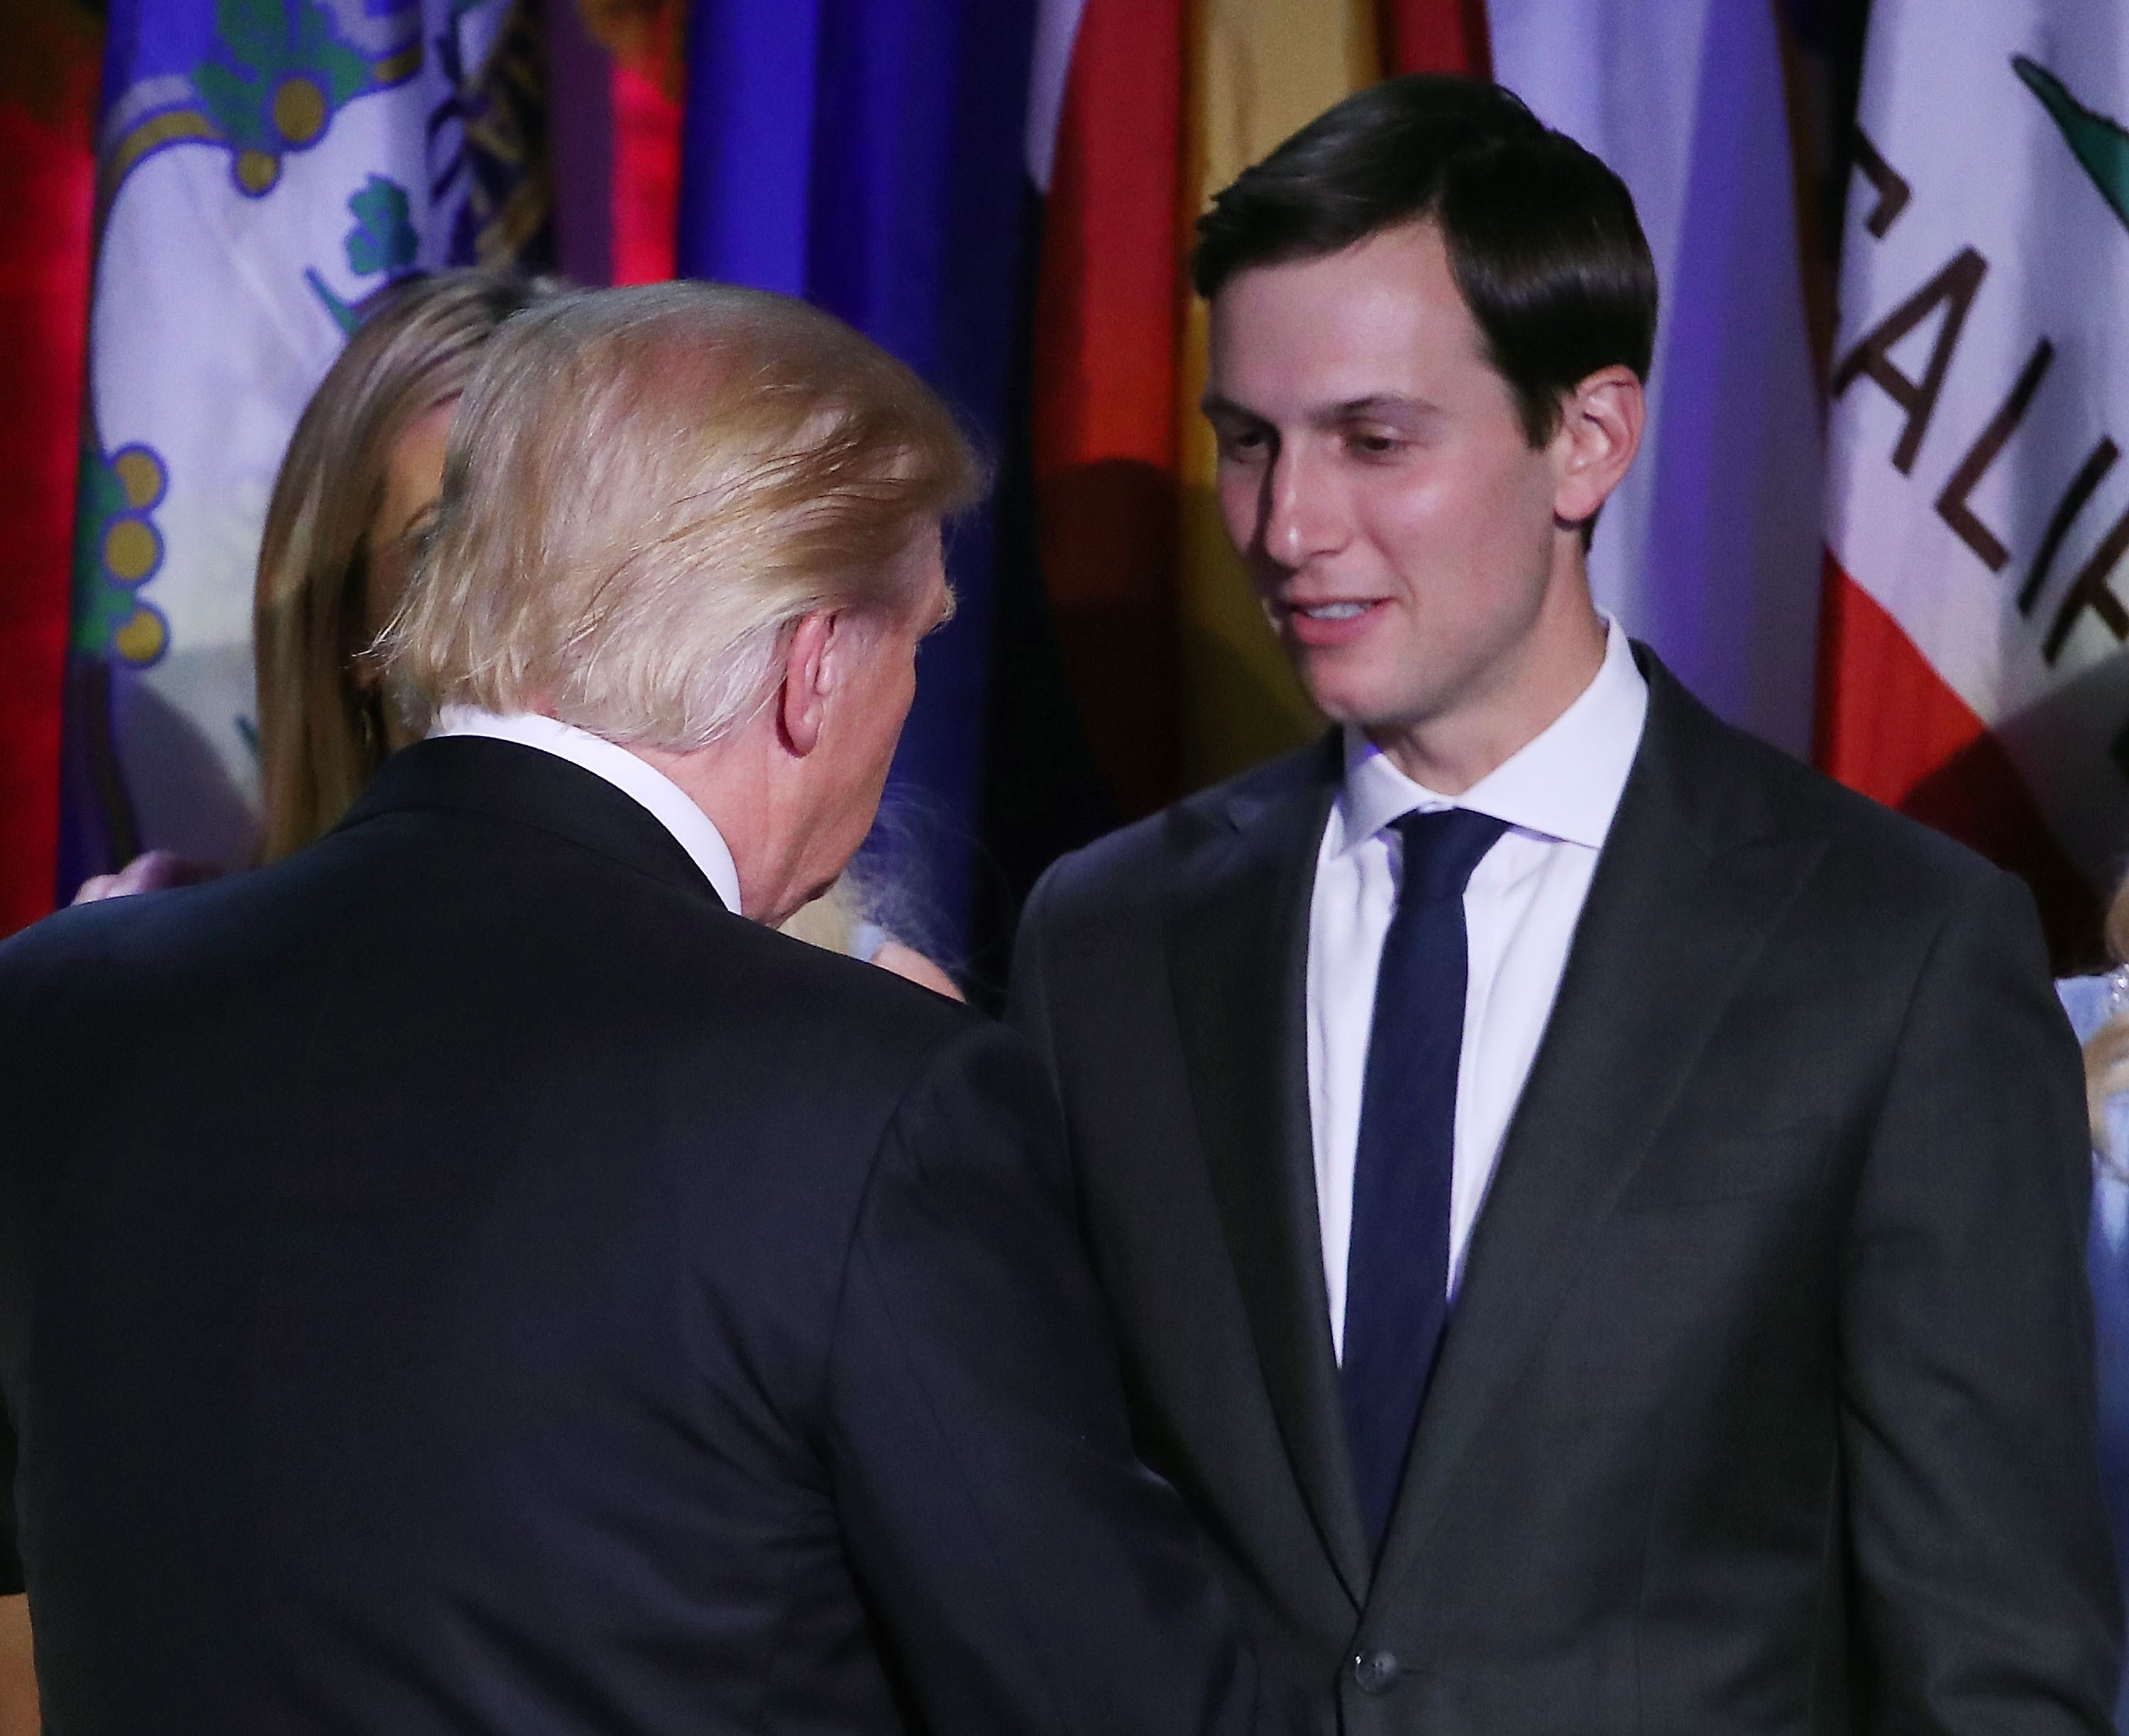 So what if Trump hires his son-in-law Jared Kushner